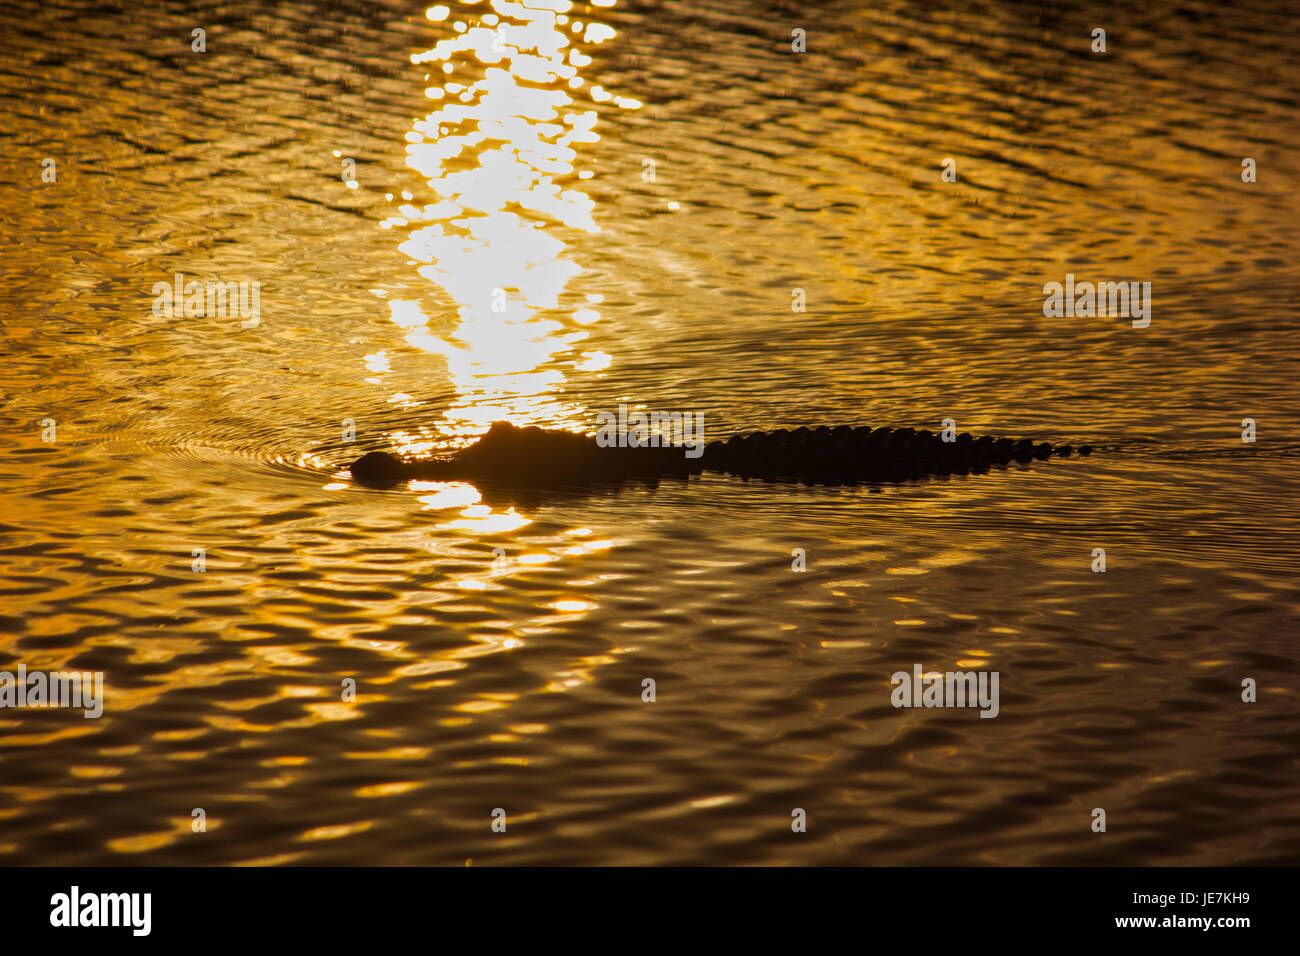 A large alligator swims past the reflection of a sunset in the Florida Everglades. The American Alligator is the apex predator of the Everglades. Stock Photo